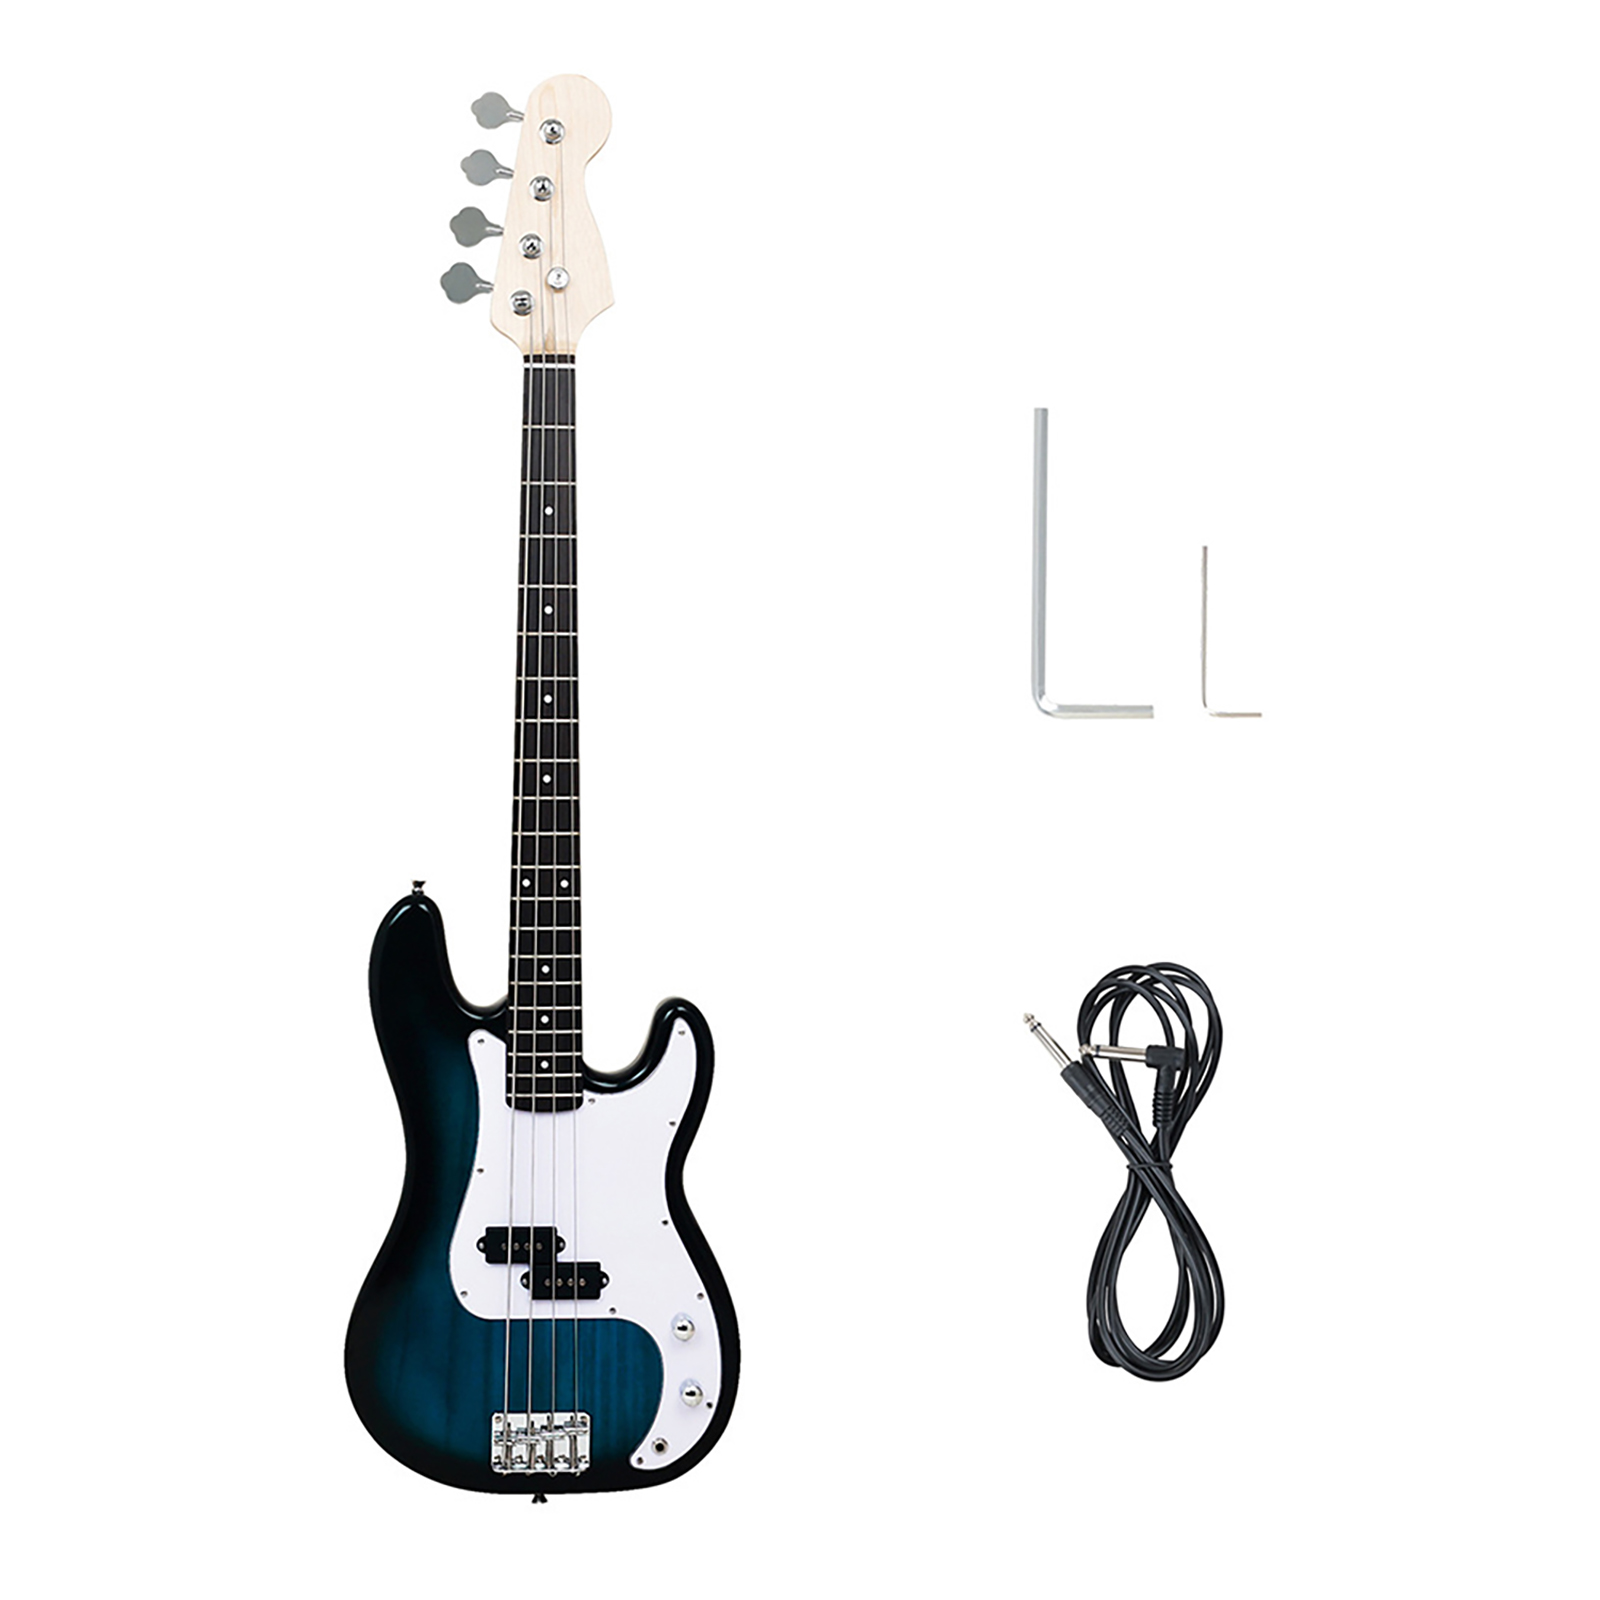 ST 4 Strings Electric Bass Guitar For Beginner 21 Frets Bass Guitar With Strings Amp Tuner Connection Cable Wrenches